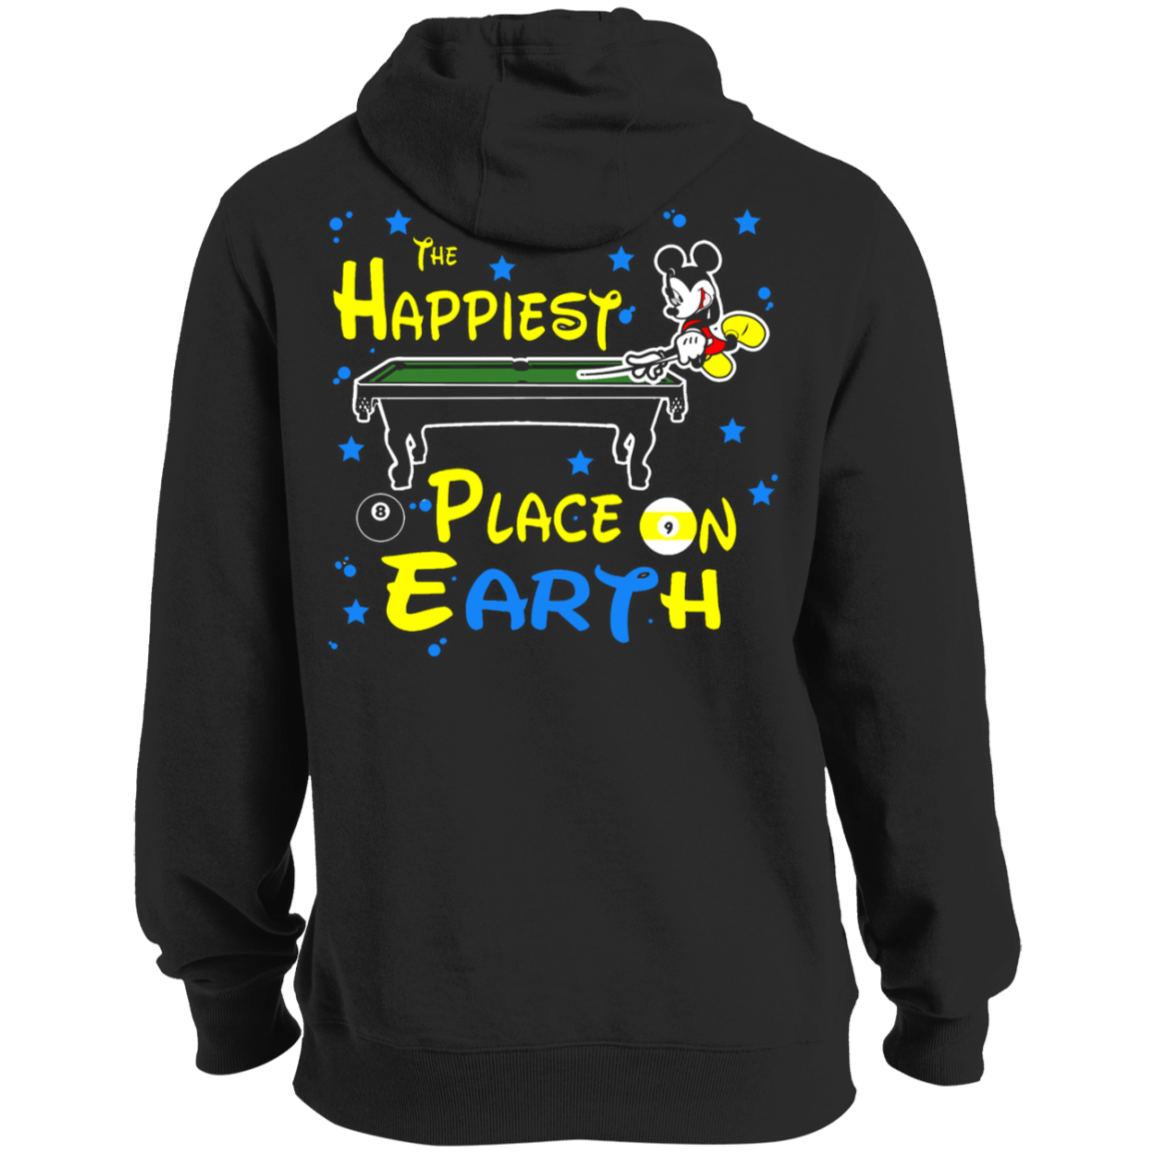 The GHOATS custom design #14. The Happiest Place On Earth. Fan Art. Tall Pullover Hoodie